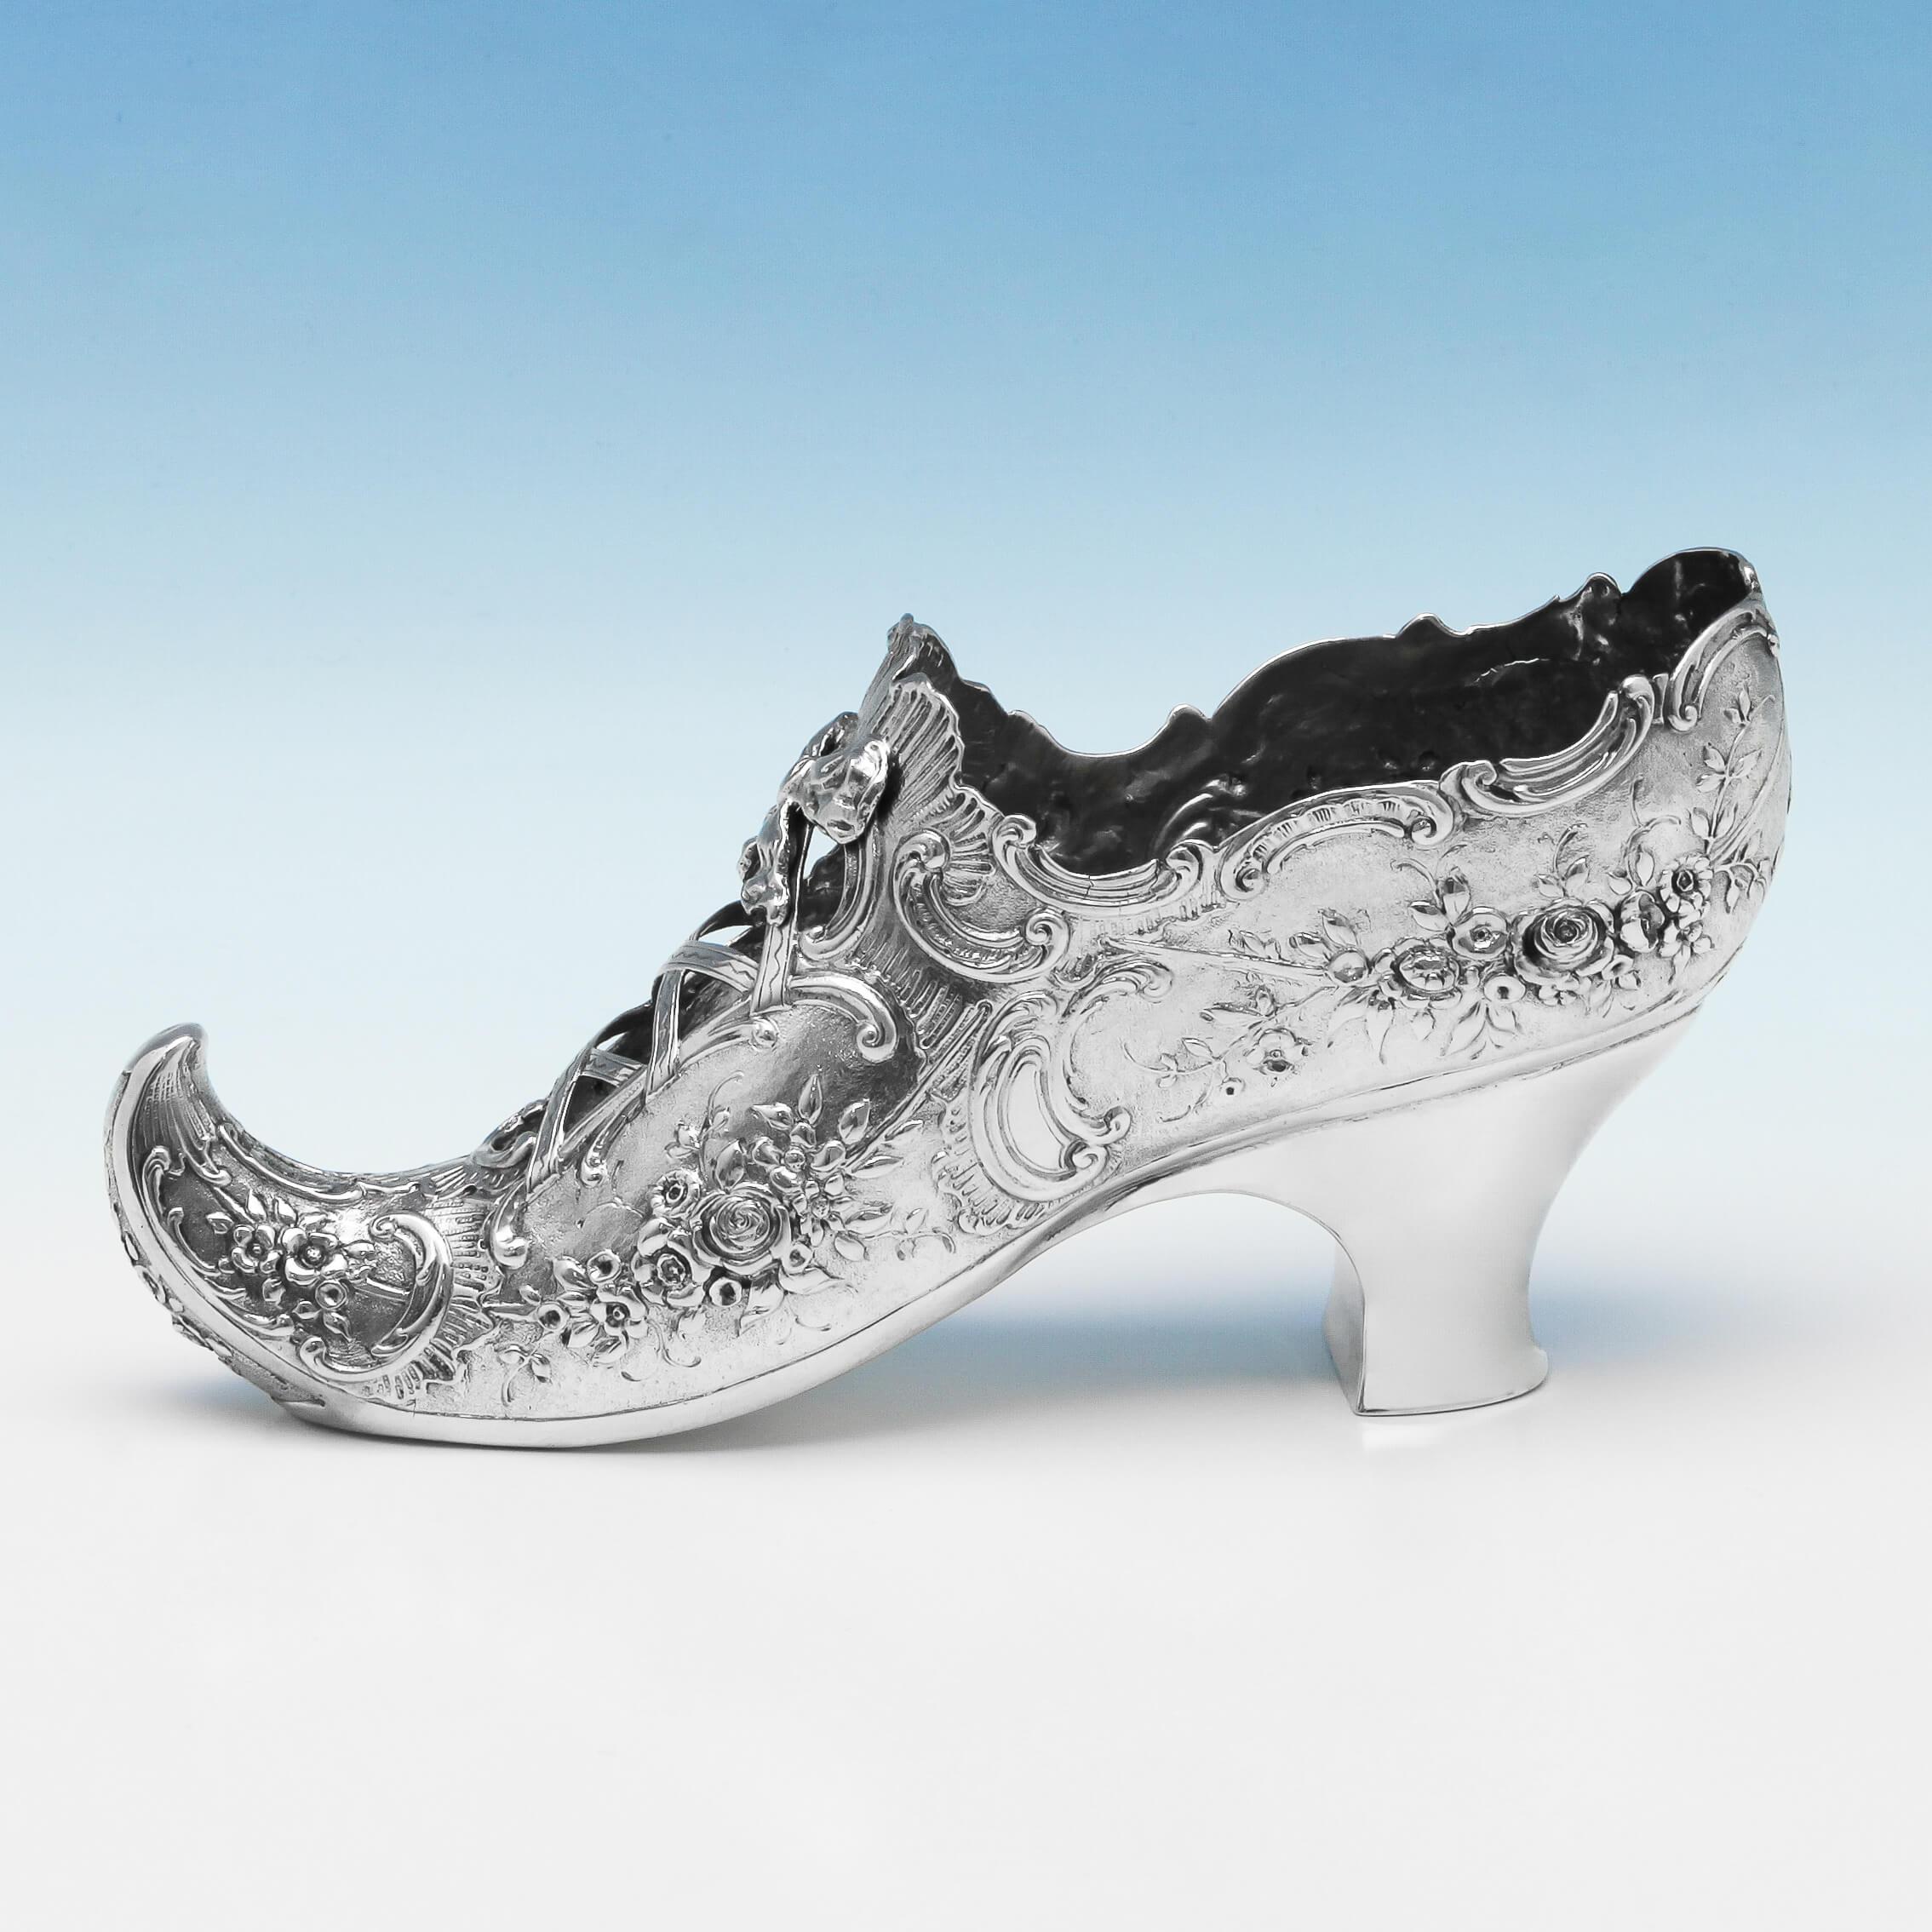 Carrying import marks for London in 1896 by Edwin Thompson Bryant, this Antique Sterling Silver Model of a Shoe, features attractive chased decoration. The shoe model measures 3.75